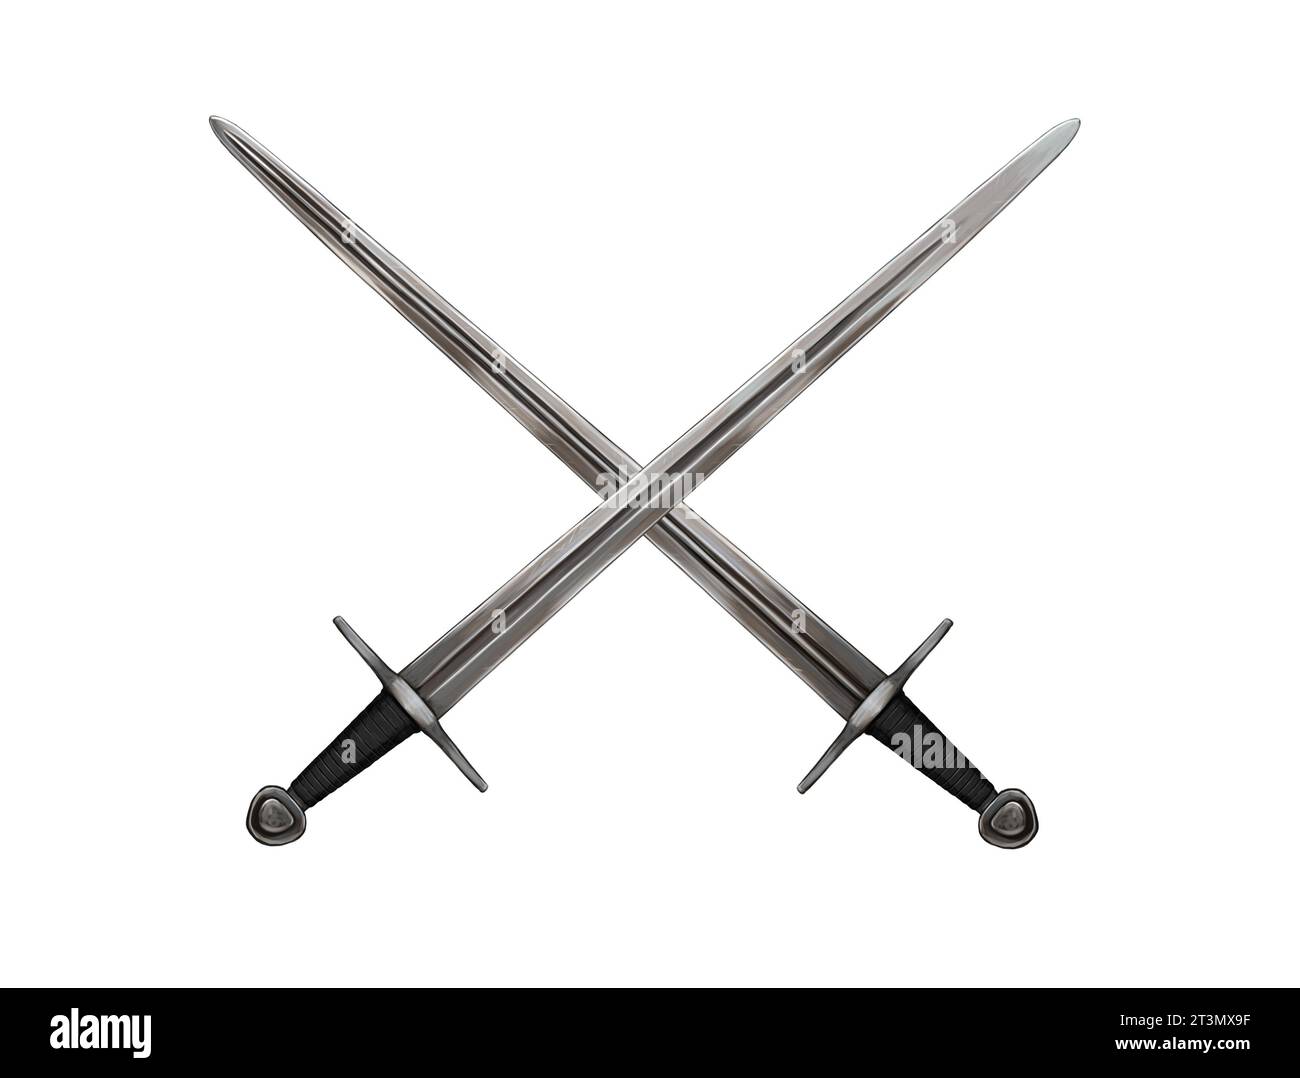 Medieval weapons. Coat of arms with crossed swords. Stock Photo